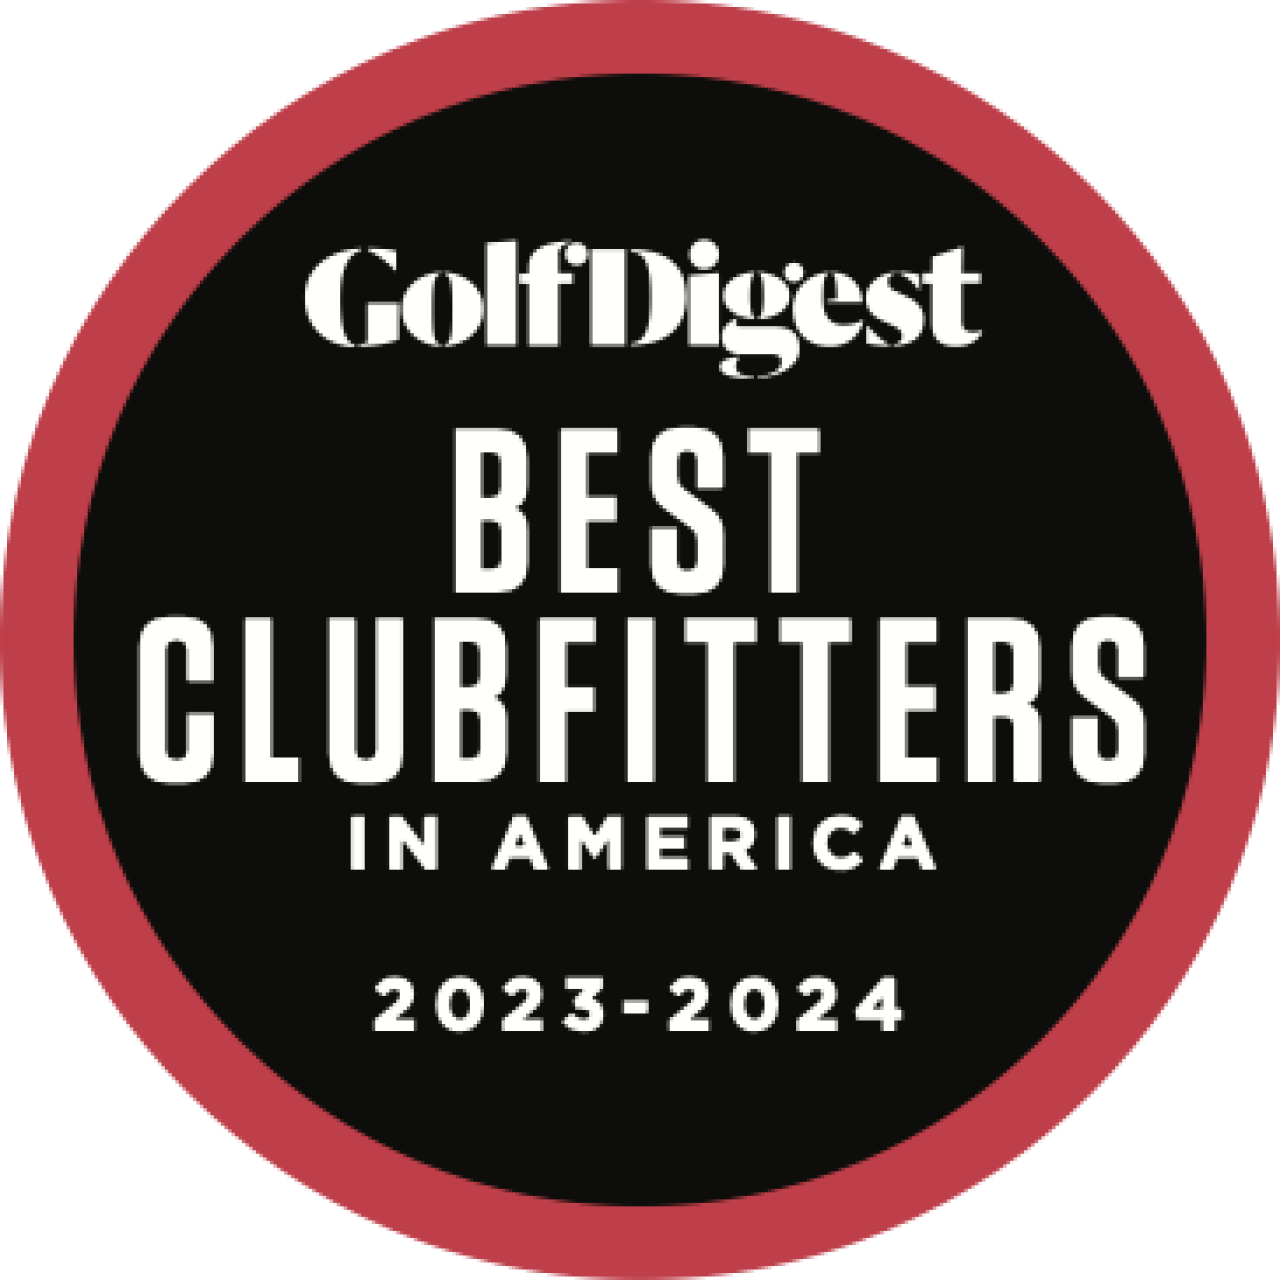 Where to Get Fit Americas Best Clubfitters Golf Equipment Clubs, Balls, Bags Golf Digest